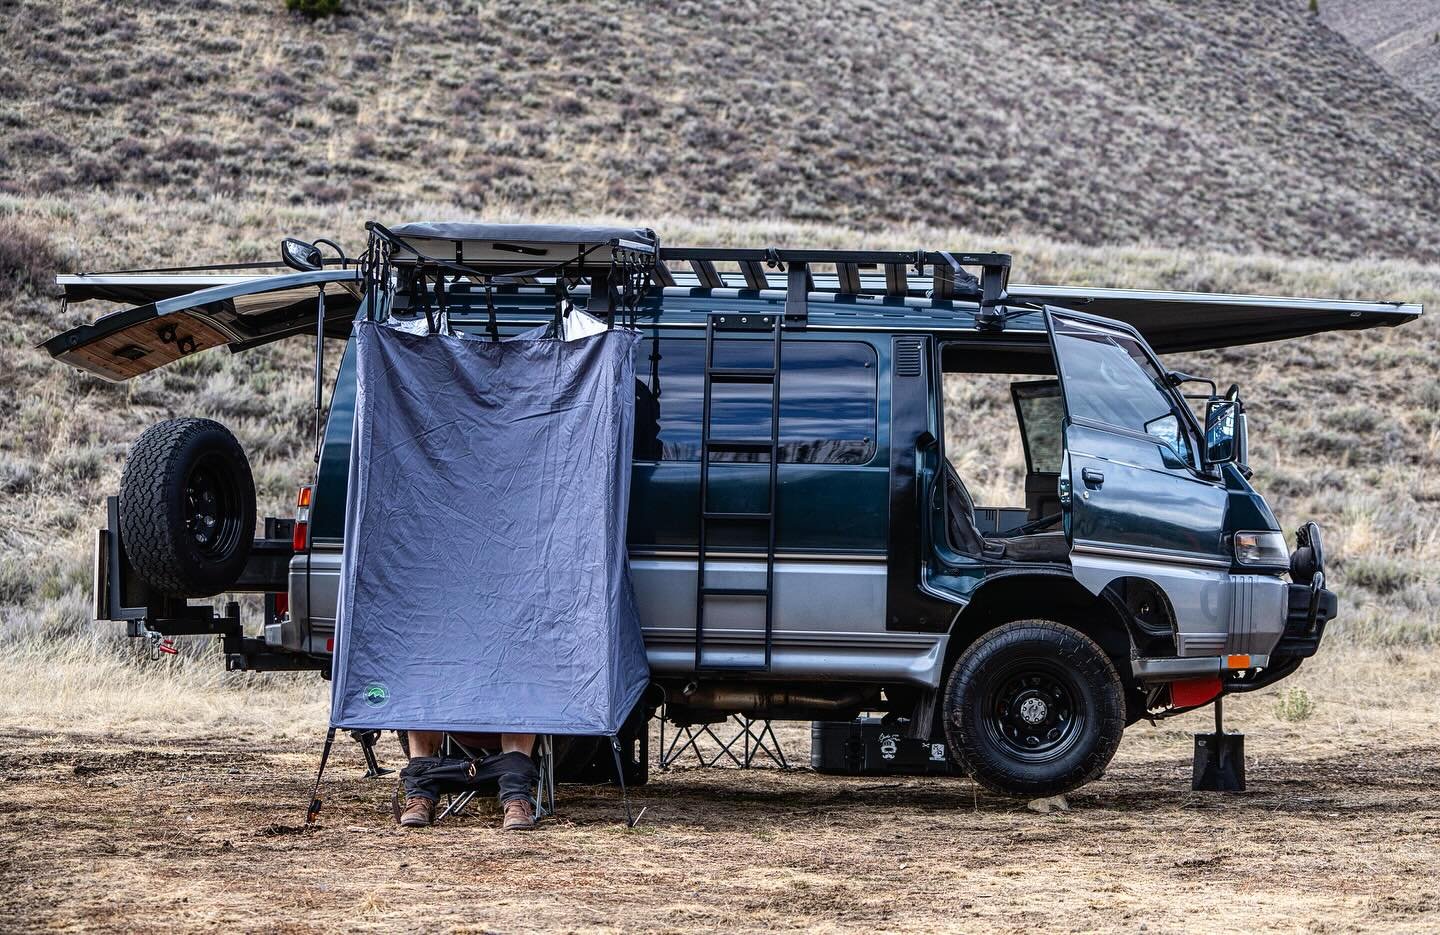 Something HUGE just dropped&hellip; 

We&rsquo;re STOKED to announce the DECKED Delica is officially for sale and equipped for adventure from top to bottom&hellip; This ambitious L300 Starwagon boasts a custom DECKED interior build out, Maintennace R